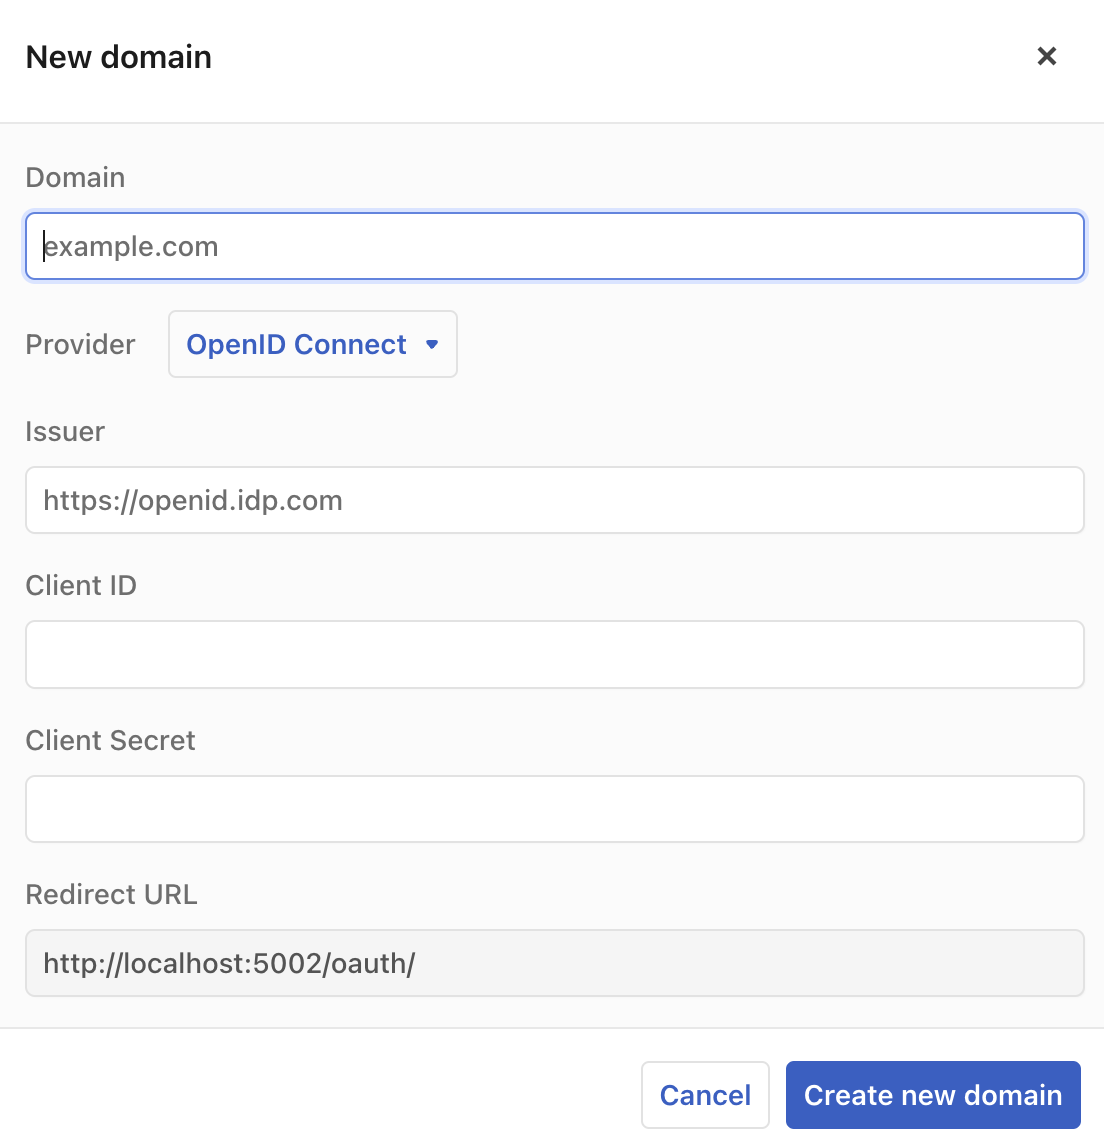 The New domain dialog, showing input fields for the domain, the provider, issuer, client ID, client secret, and redirect URL.